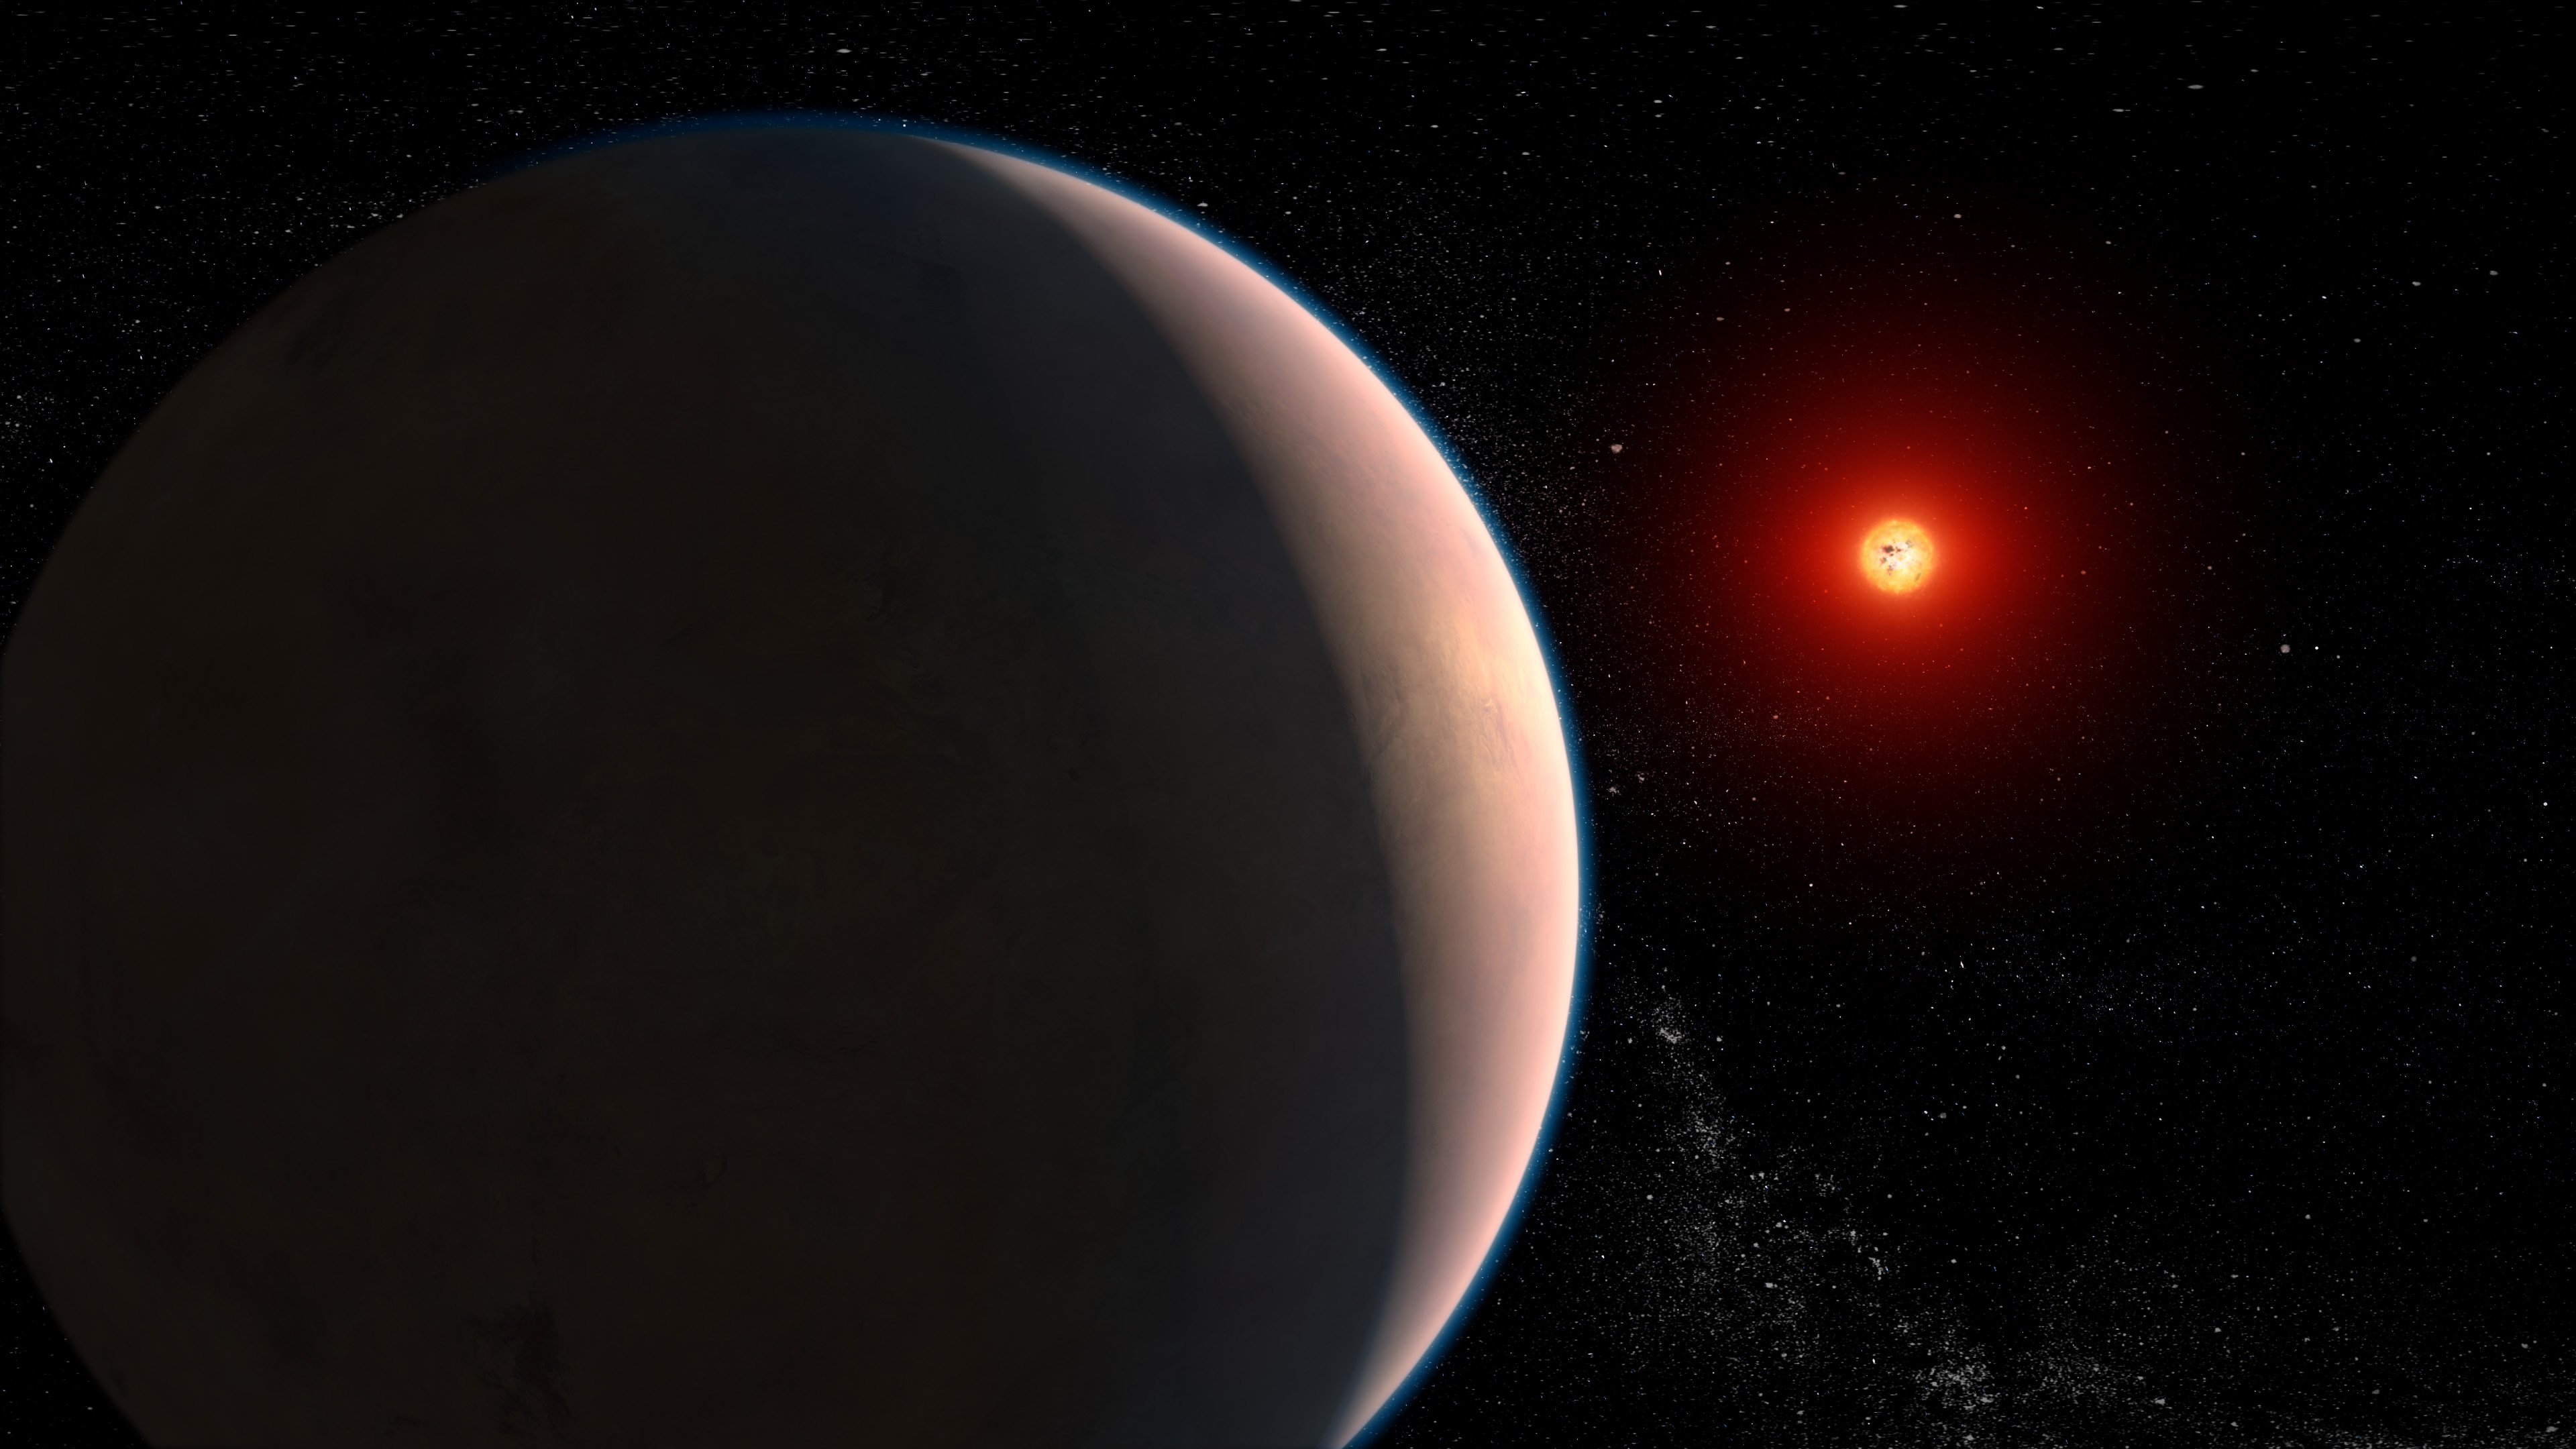 Artist's concept of the rocky exoplanet GJ 486b